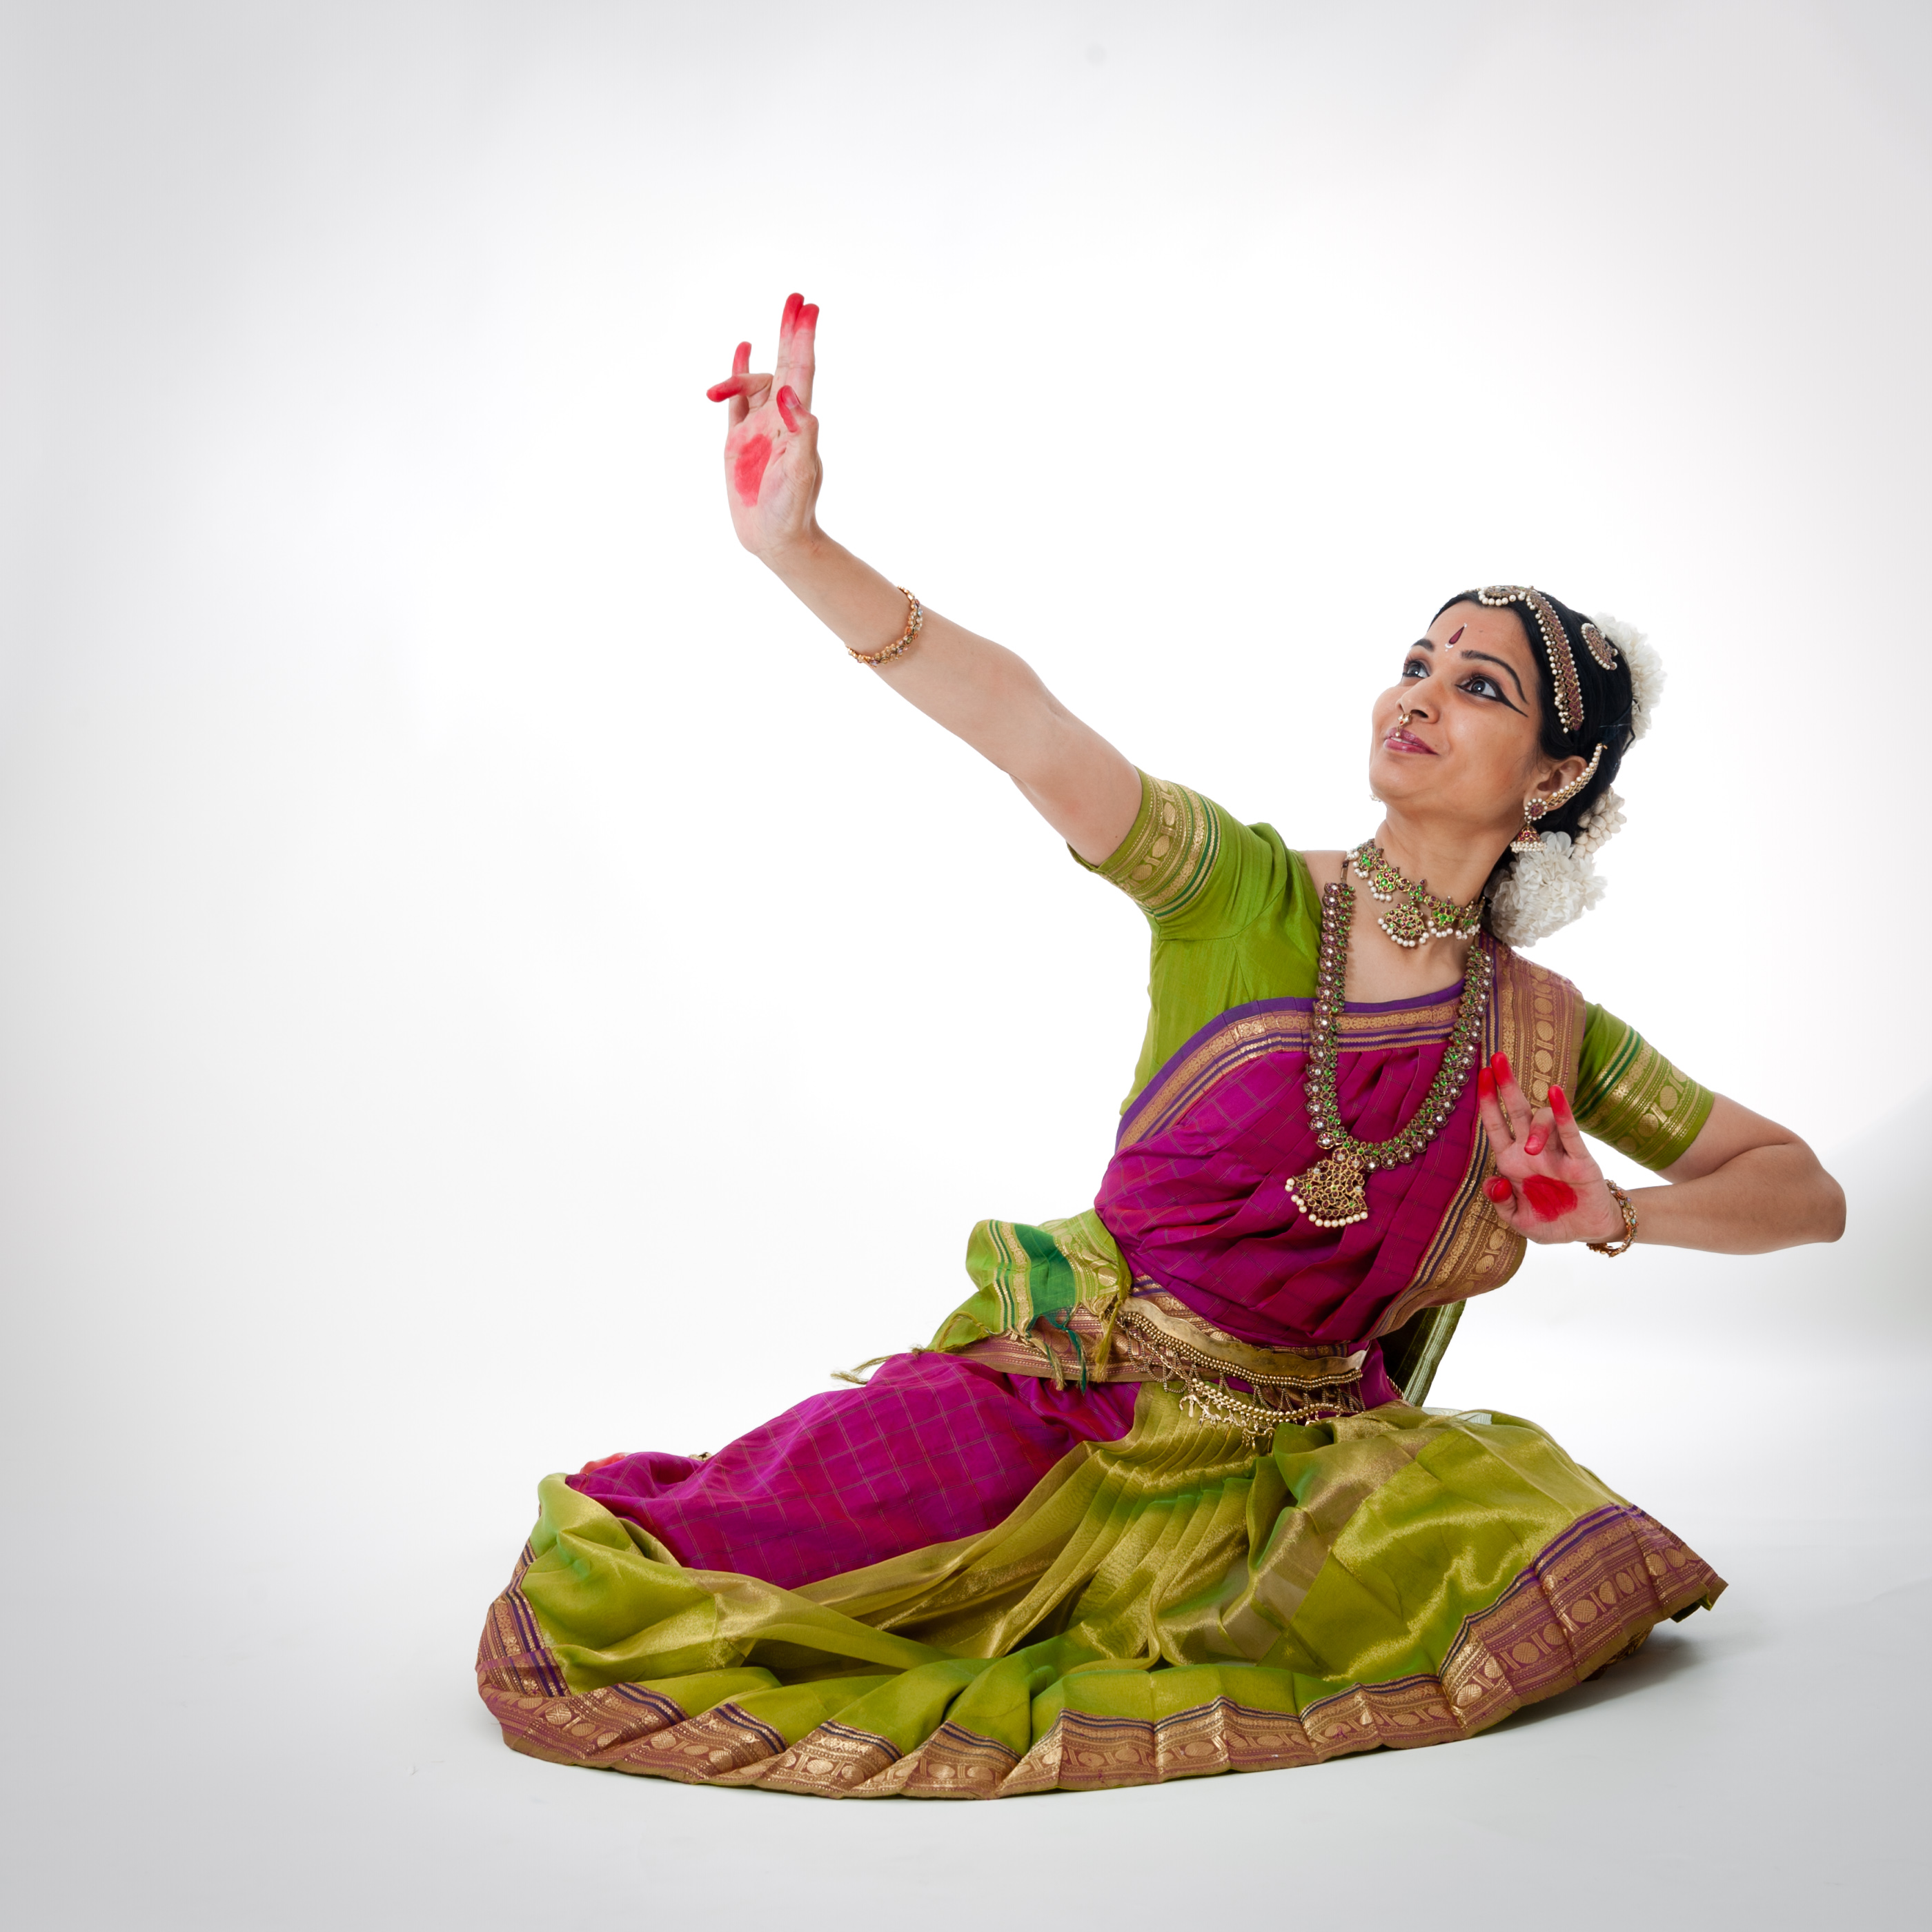 Woman in pink and green costume in a dance pose